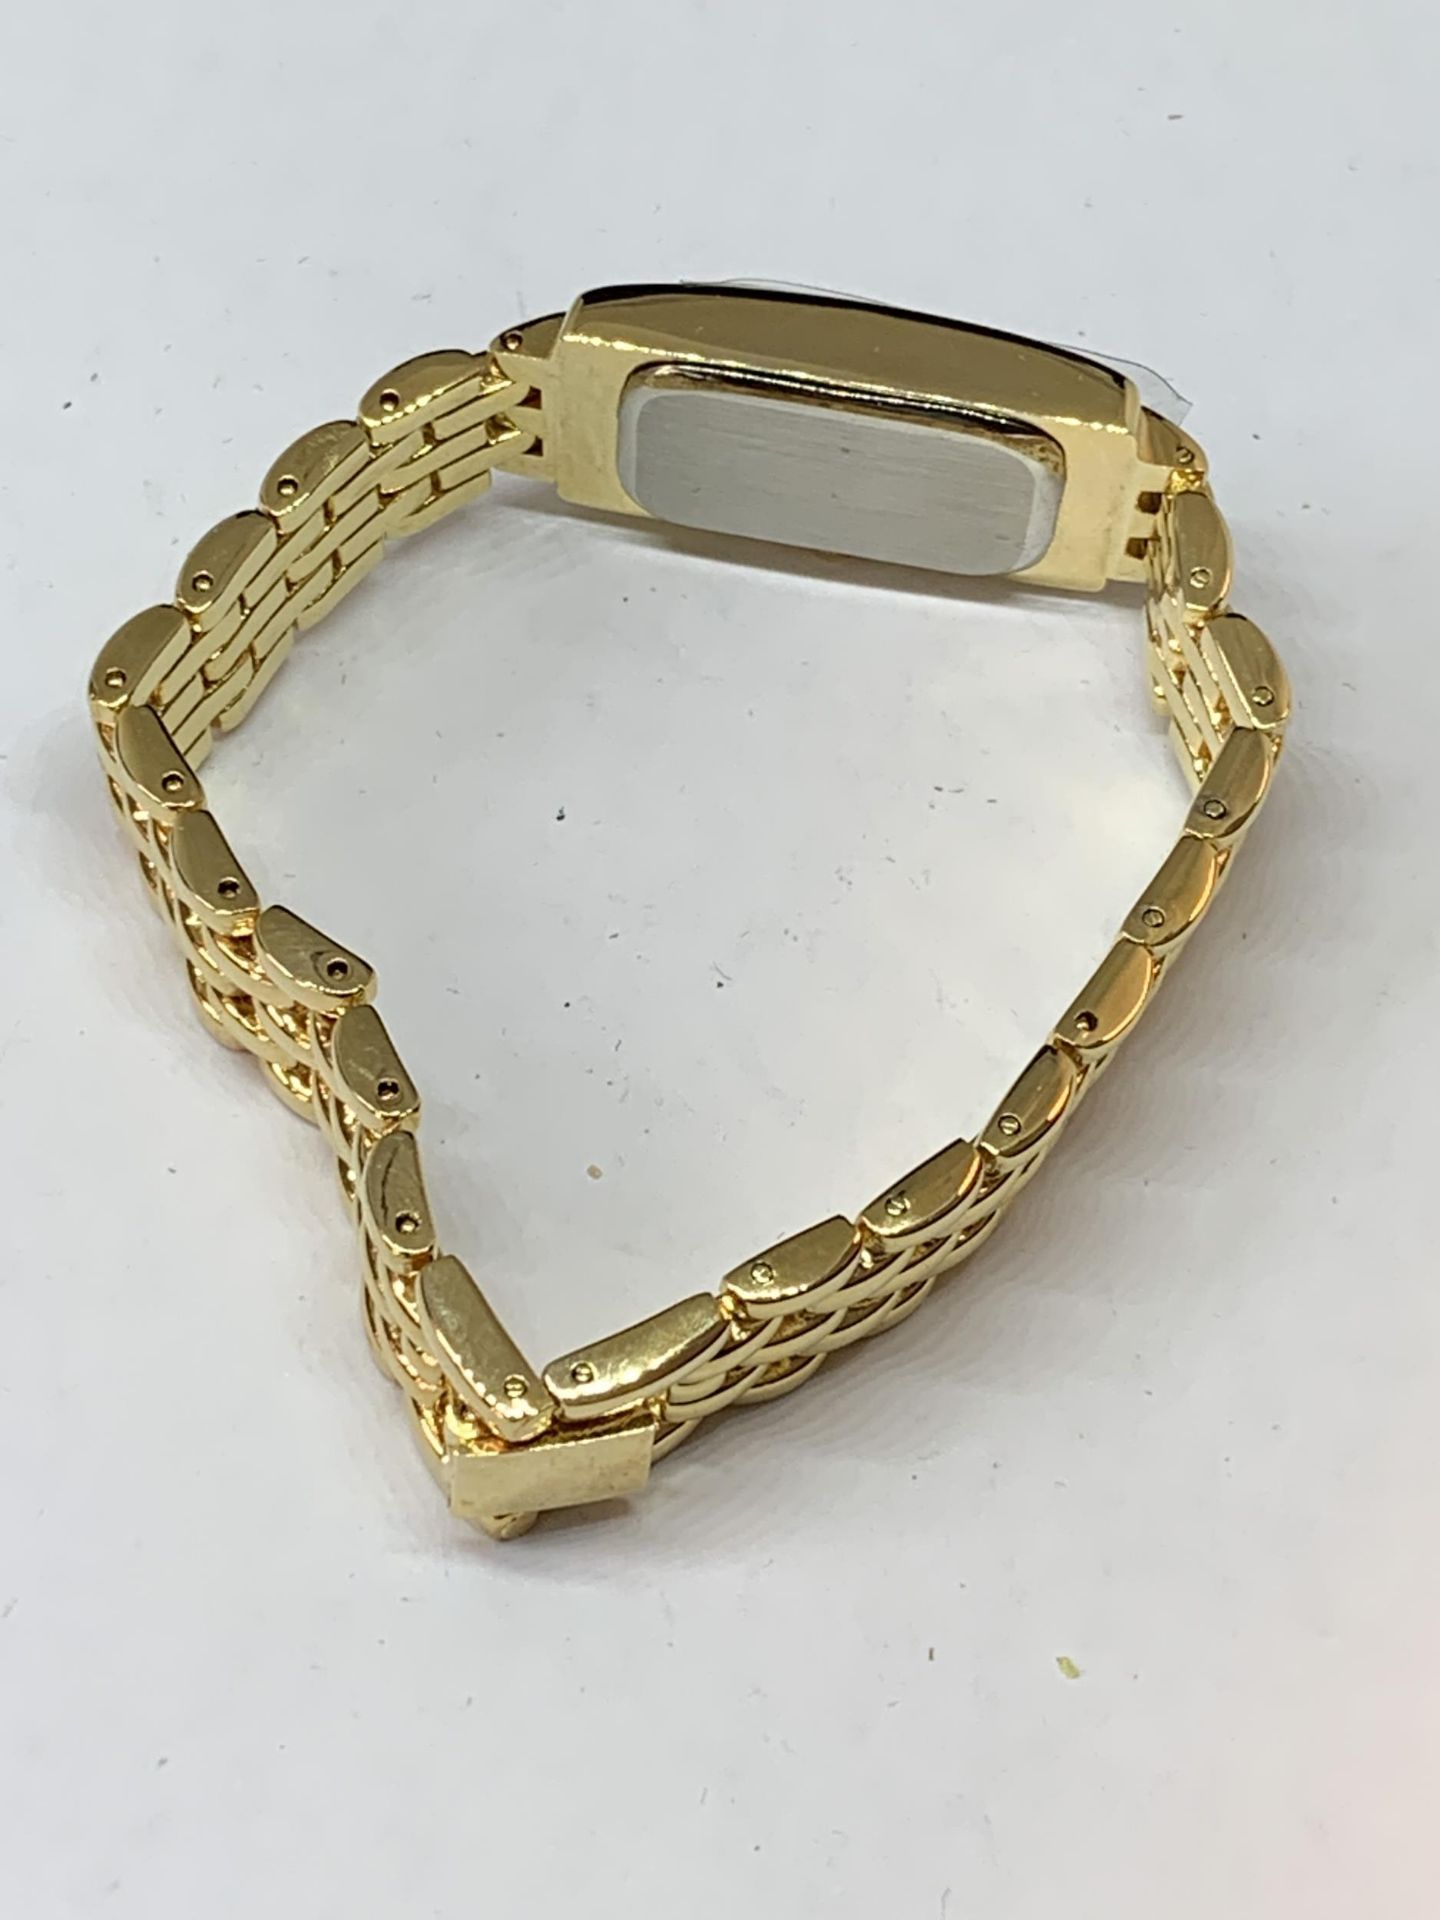 A YELLOW METAL WRIST WATCH WITH RECTANGULAR FACE SEEN WORKING BUT NO WARRANTY - Image 3 of 3